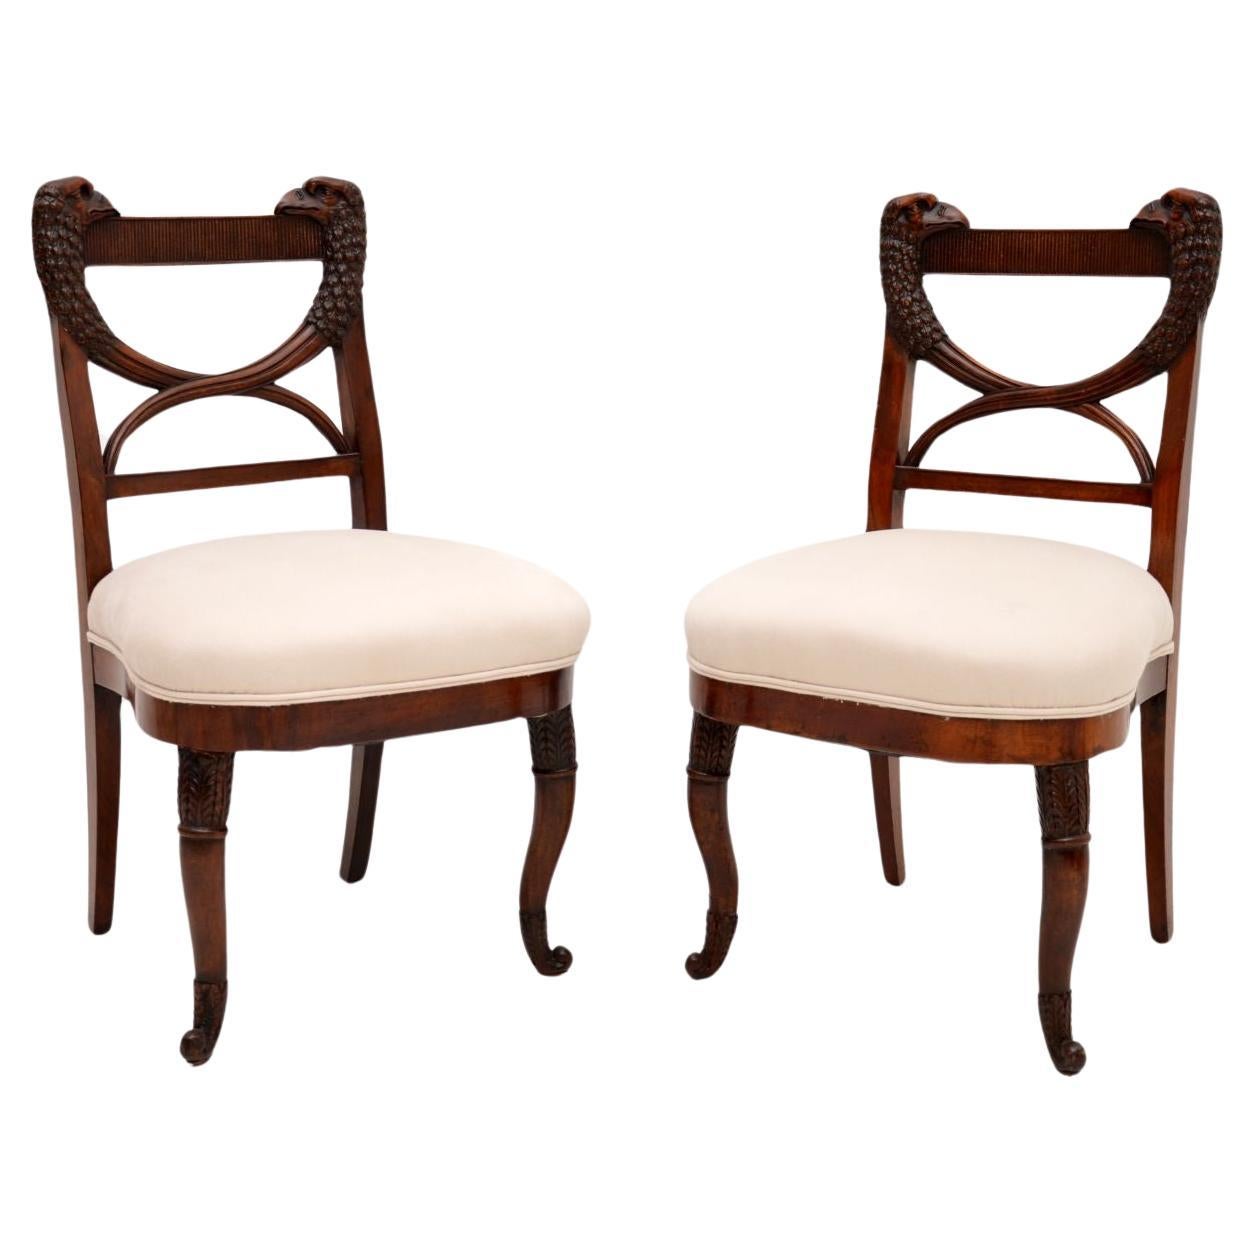 Pair of Antique Carved Side Chairs